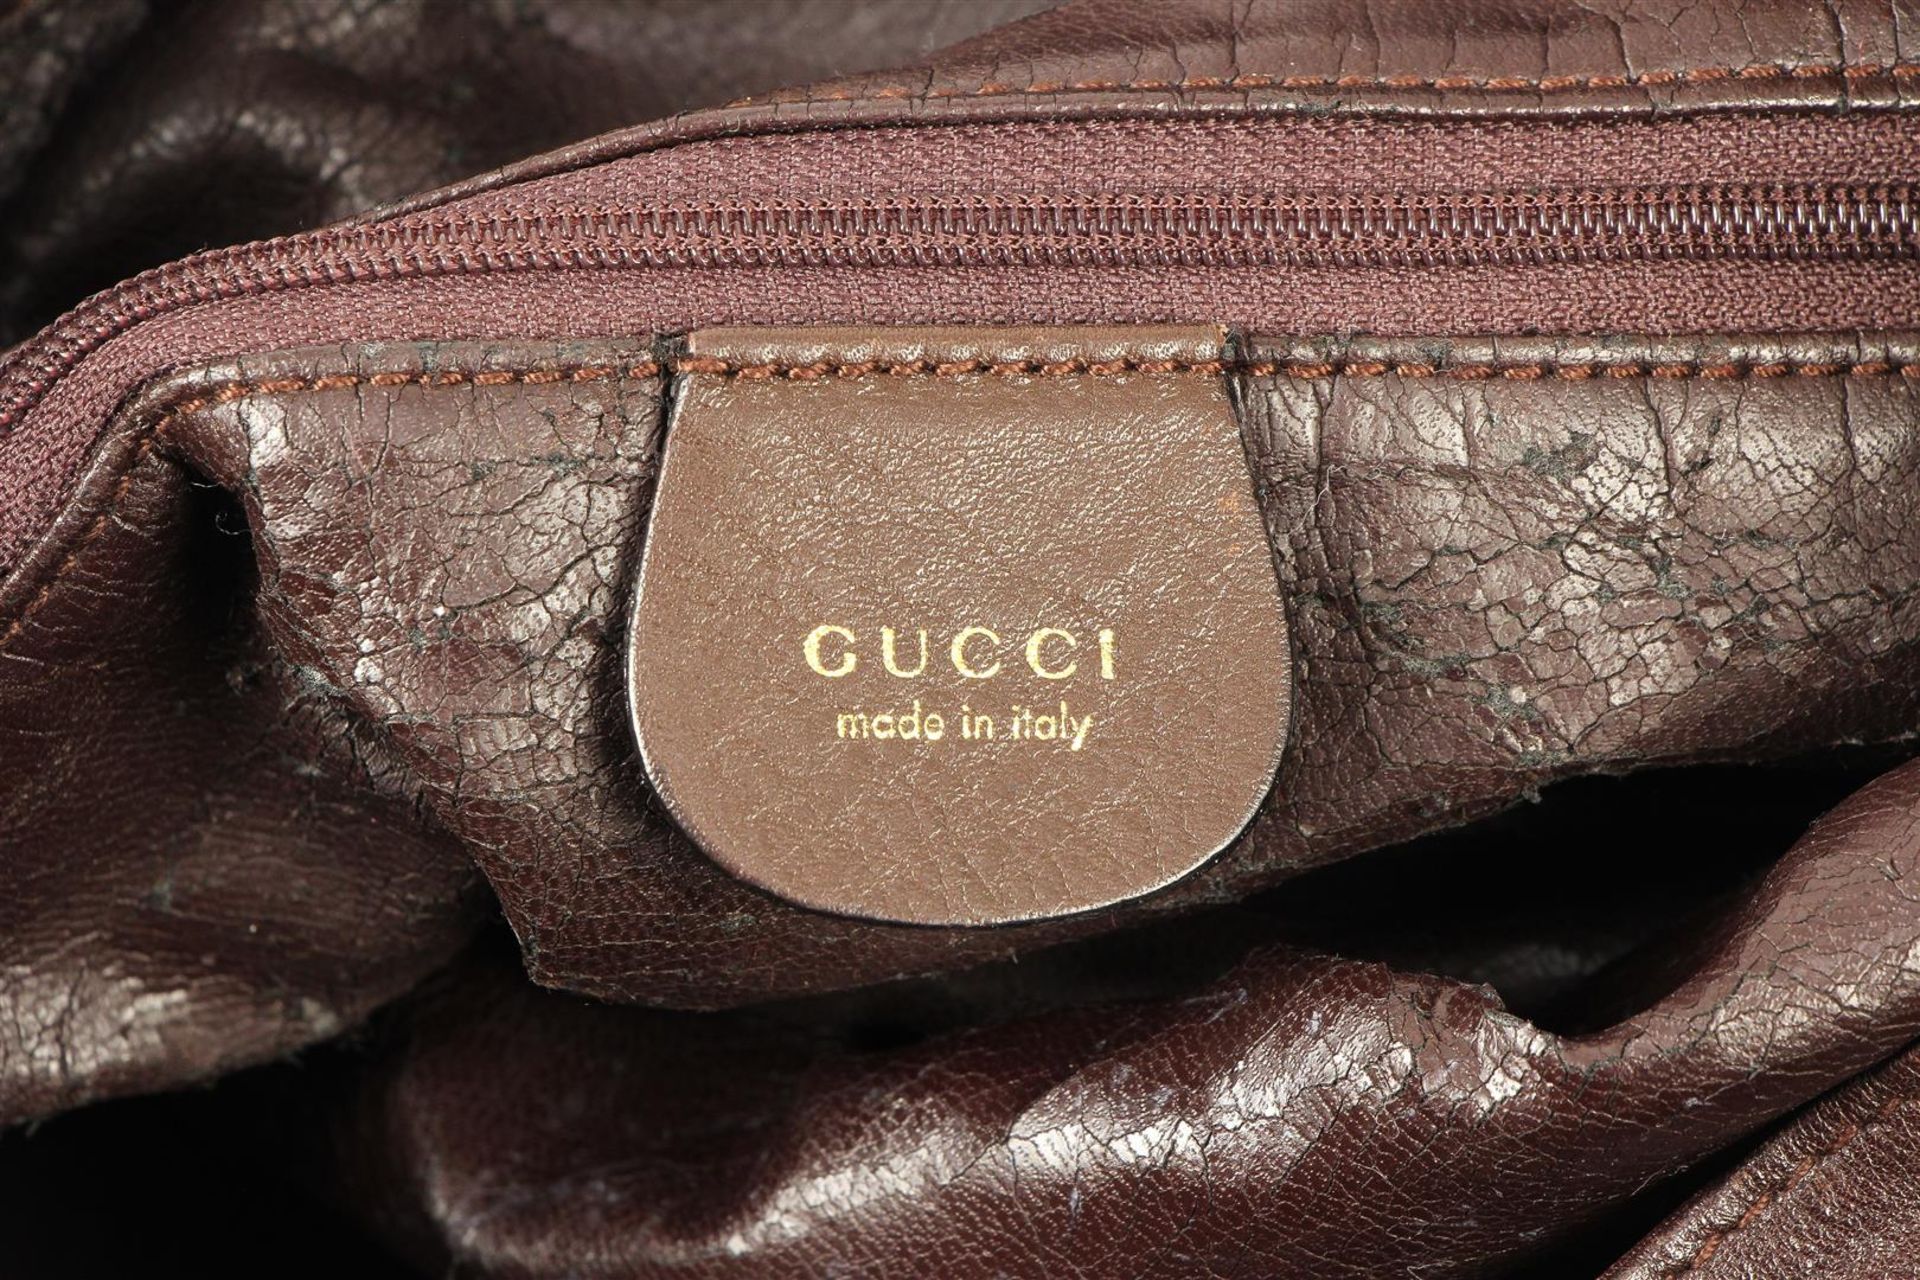 Gucci, brown leather tote bag, 'Bamboo', with leather shouldestrap and dust cover. H x W x D: 31 x 3 - Image 5 of 5